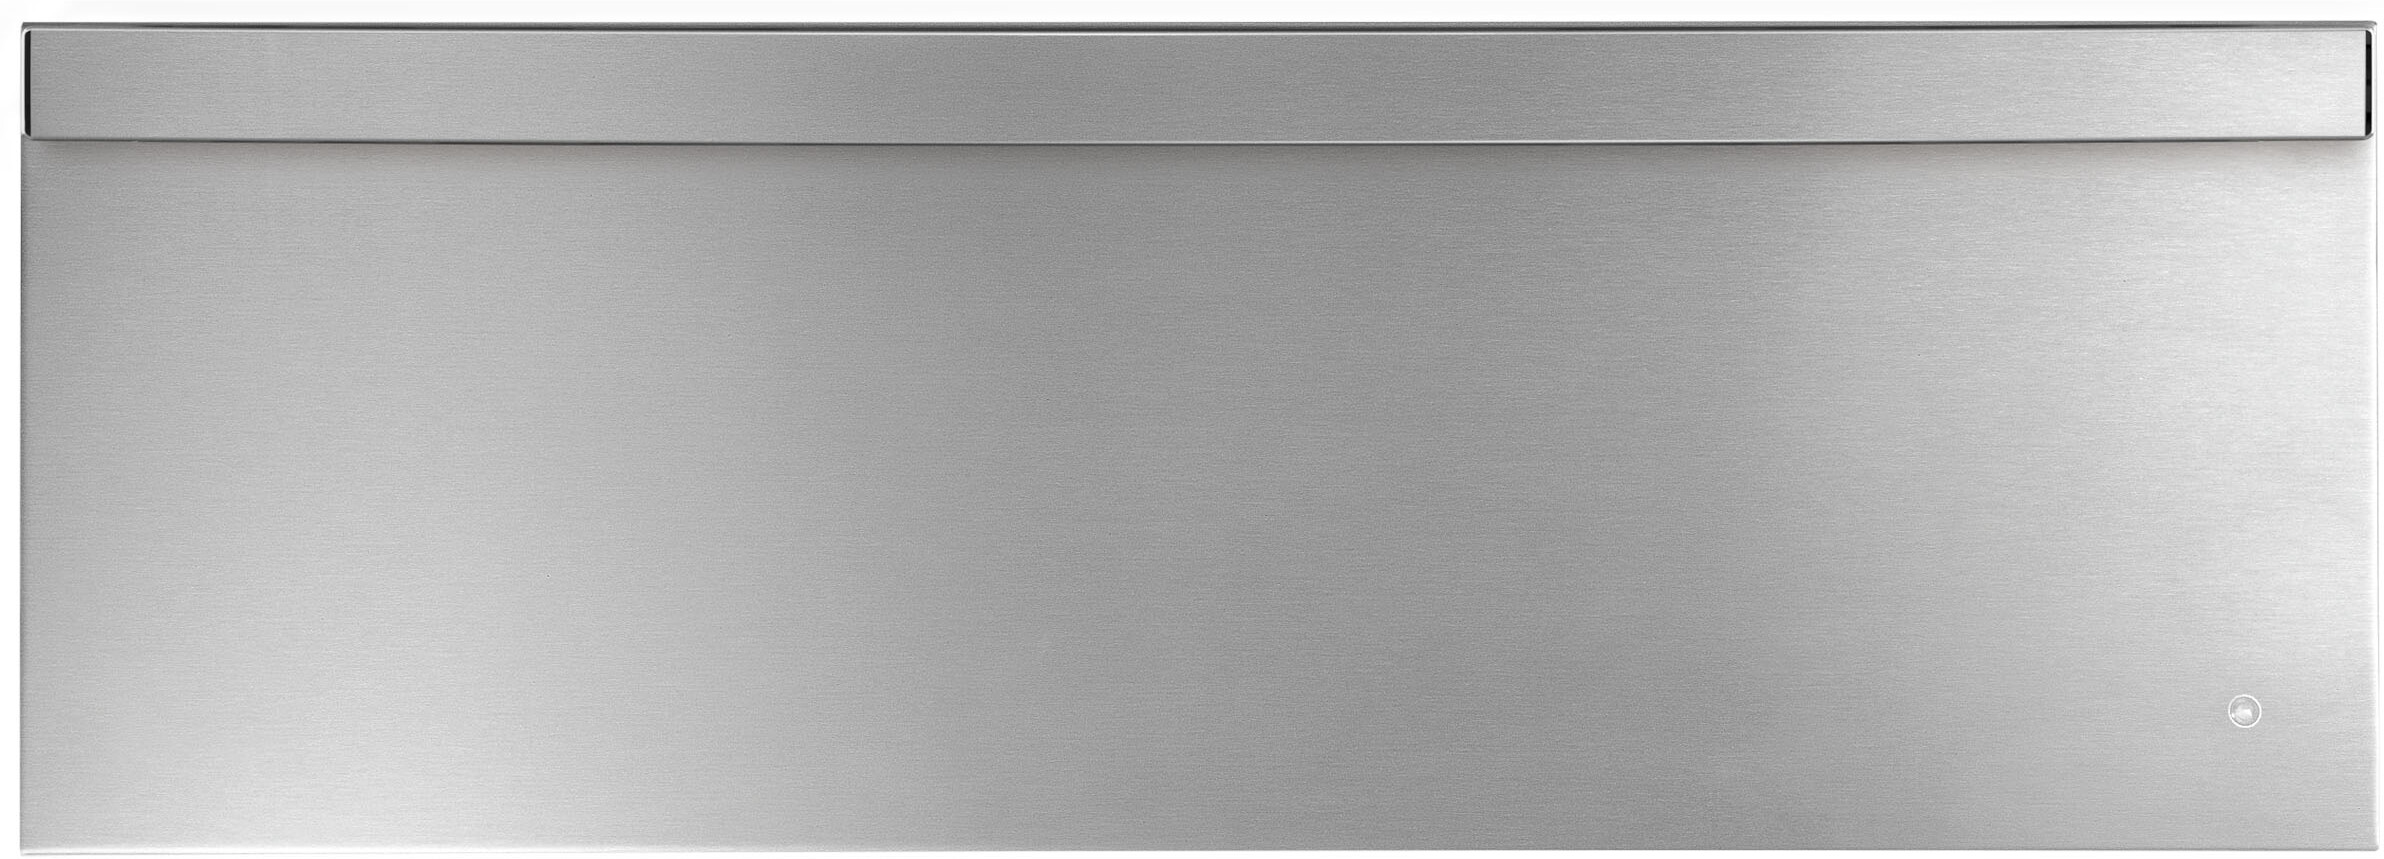 30"" Electric Warming Drawer - GE PTW9000SPSS